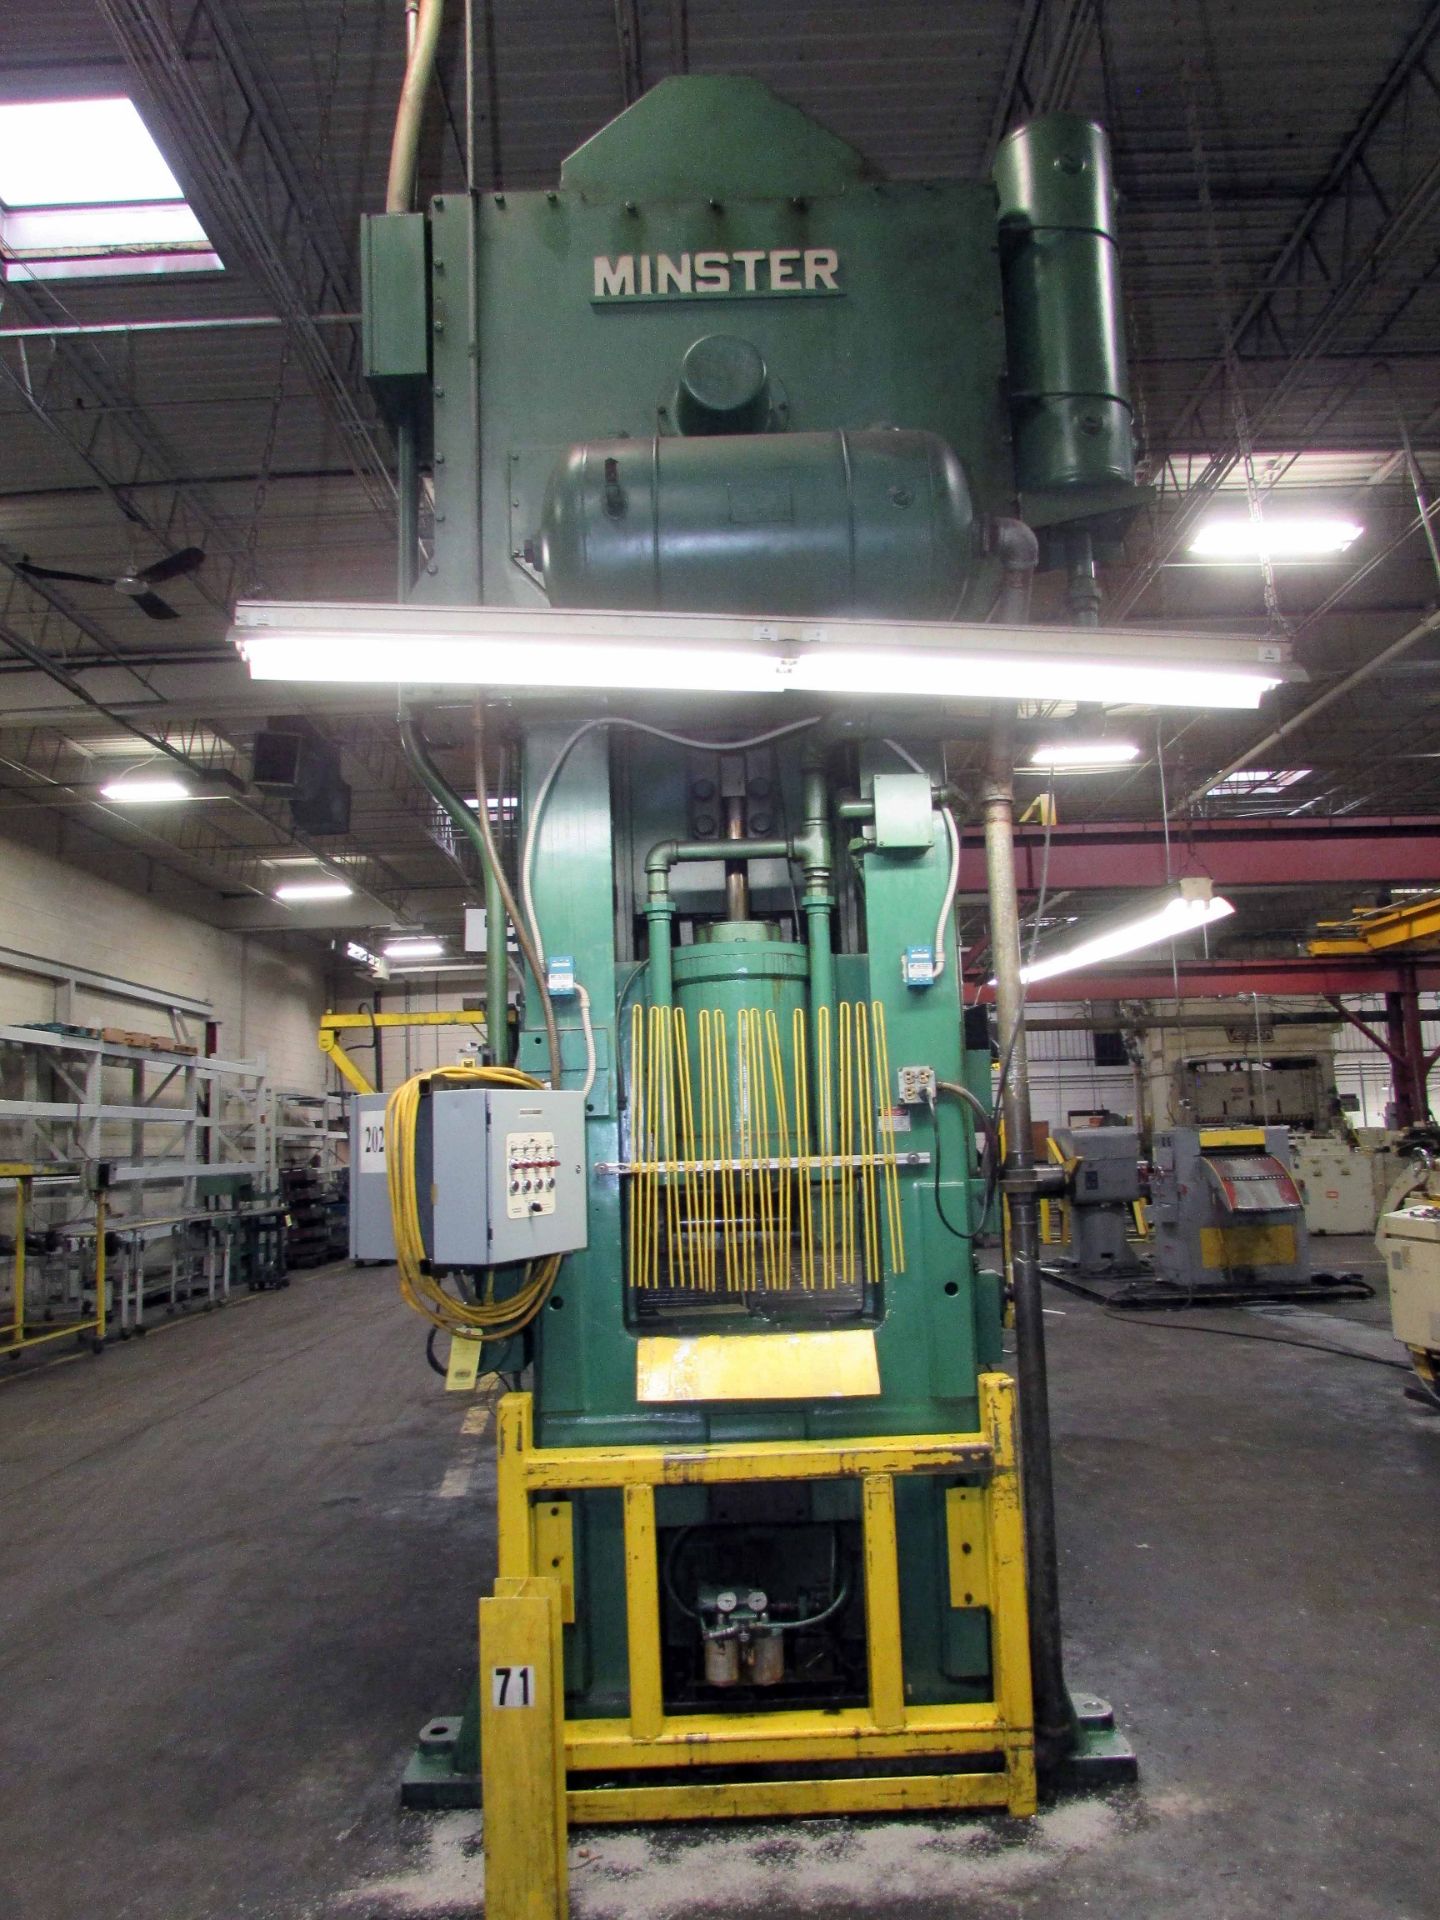 STRAIGHT SIDE 2-POINT ECCENTRIC GEARED PRESS, MINSTER 300 T. CAP. MDL. E2-300-96-48 “HEVI-STAMPER” - Image 6 of 23